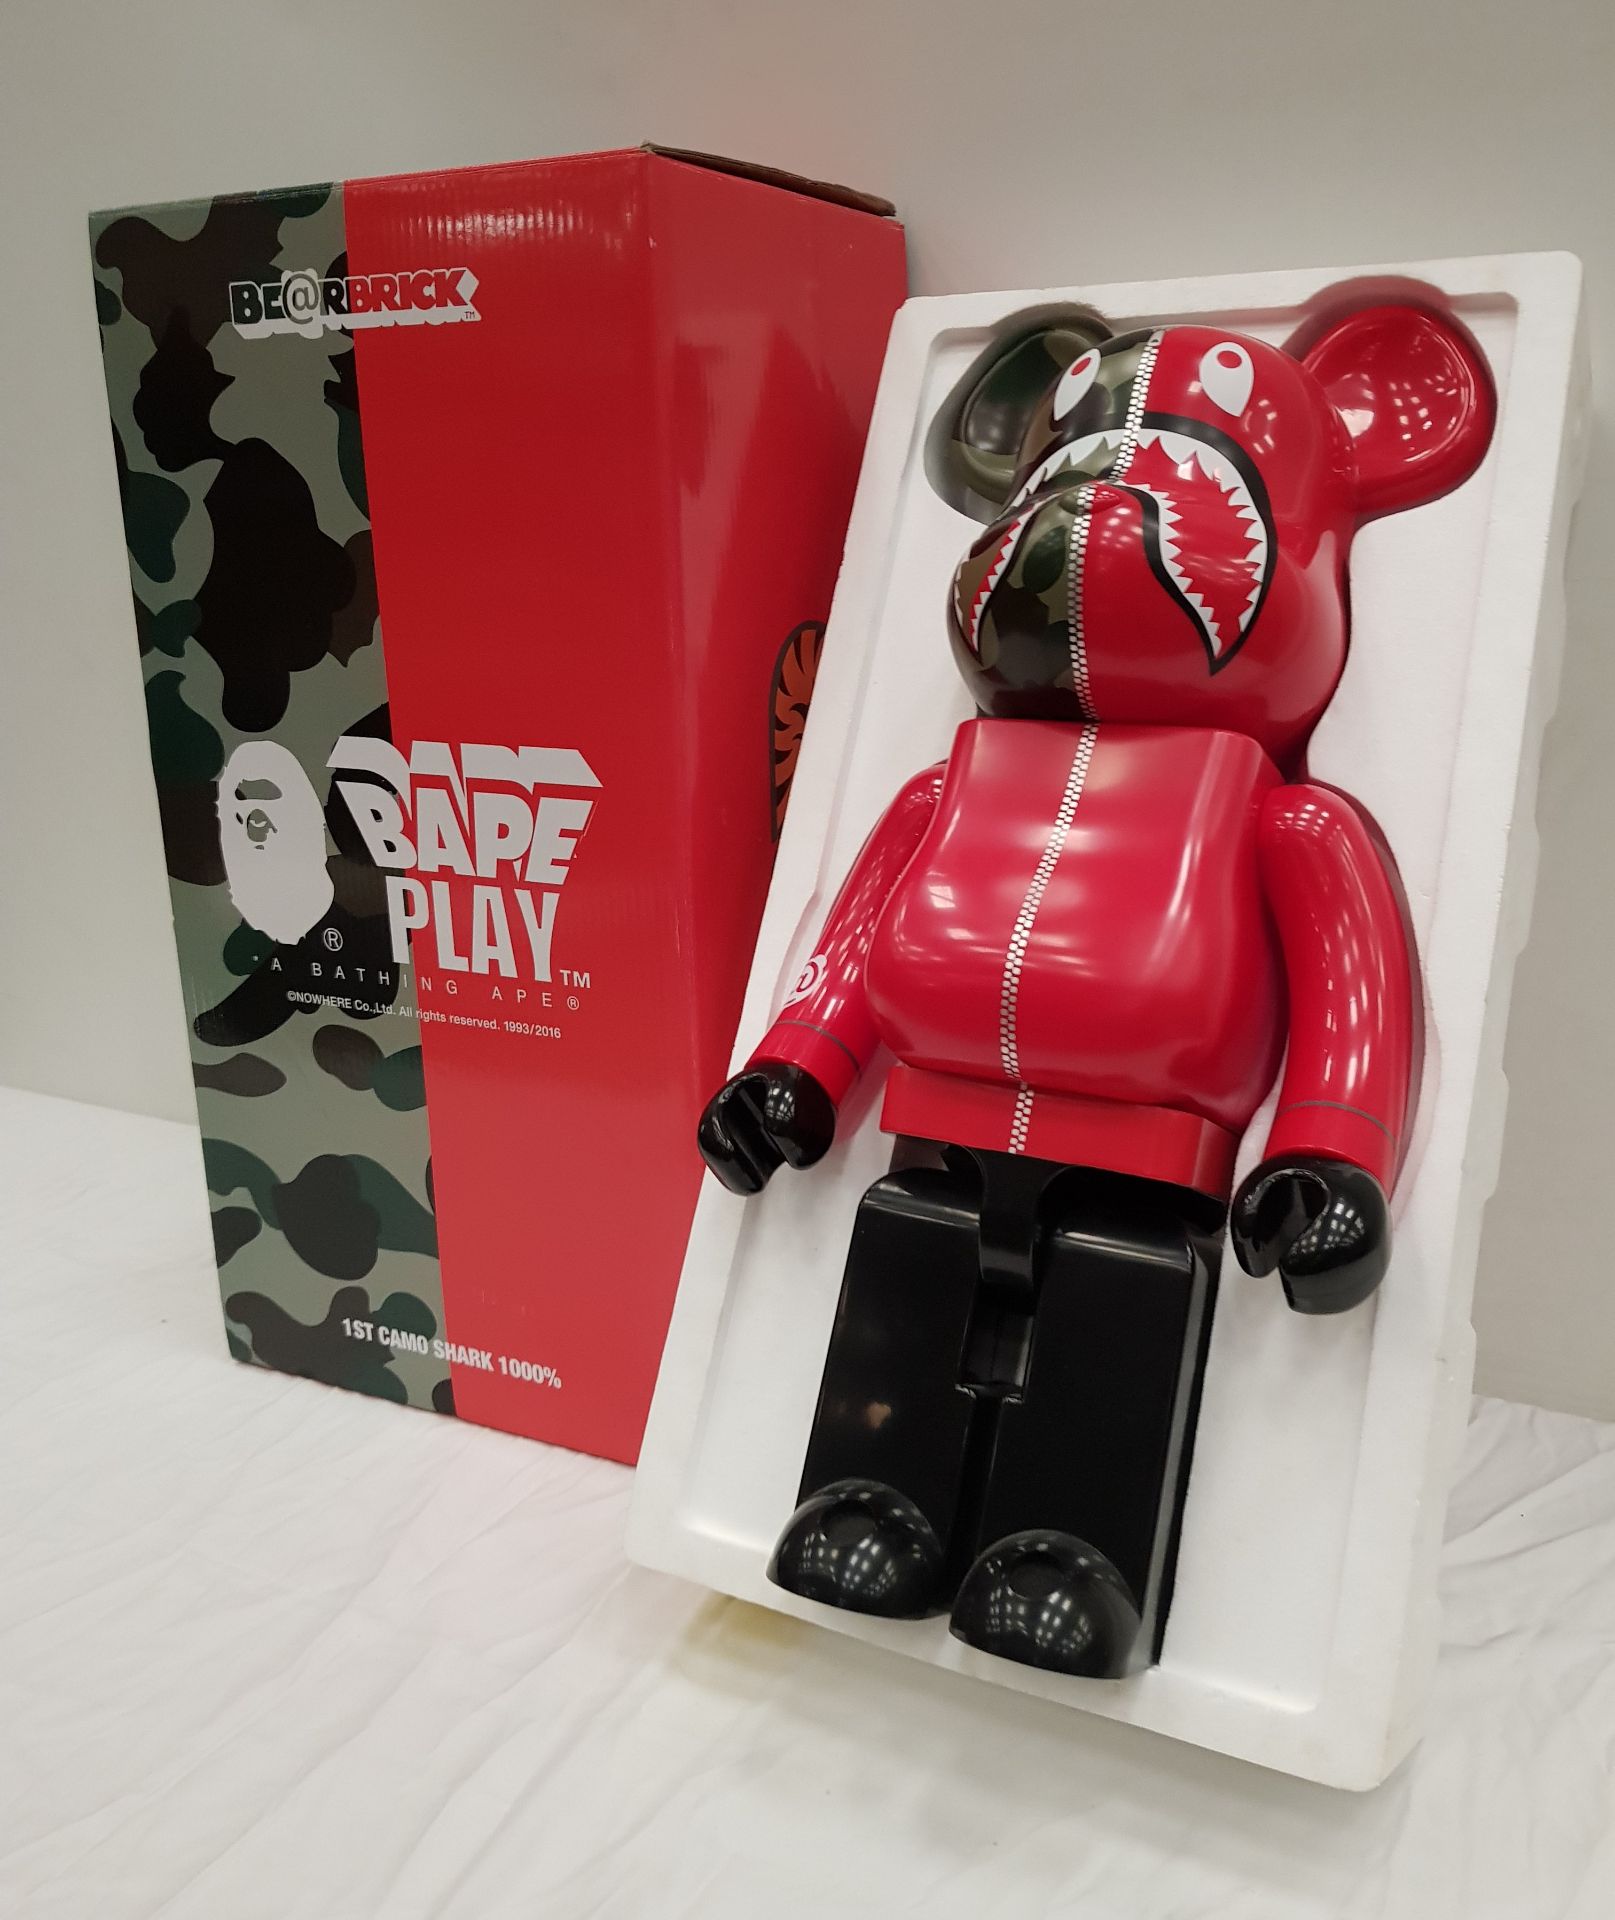 1 X BOXED BEARBRICK A BATHING APE 1ST CAMO SHARK RED 1000% - COLLECTABLE ART FIGURES - 70 CM HEIGHT - Image 4 of 4